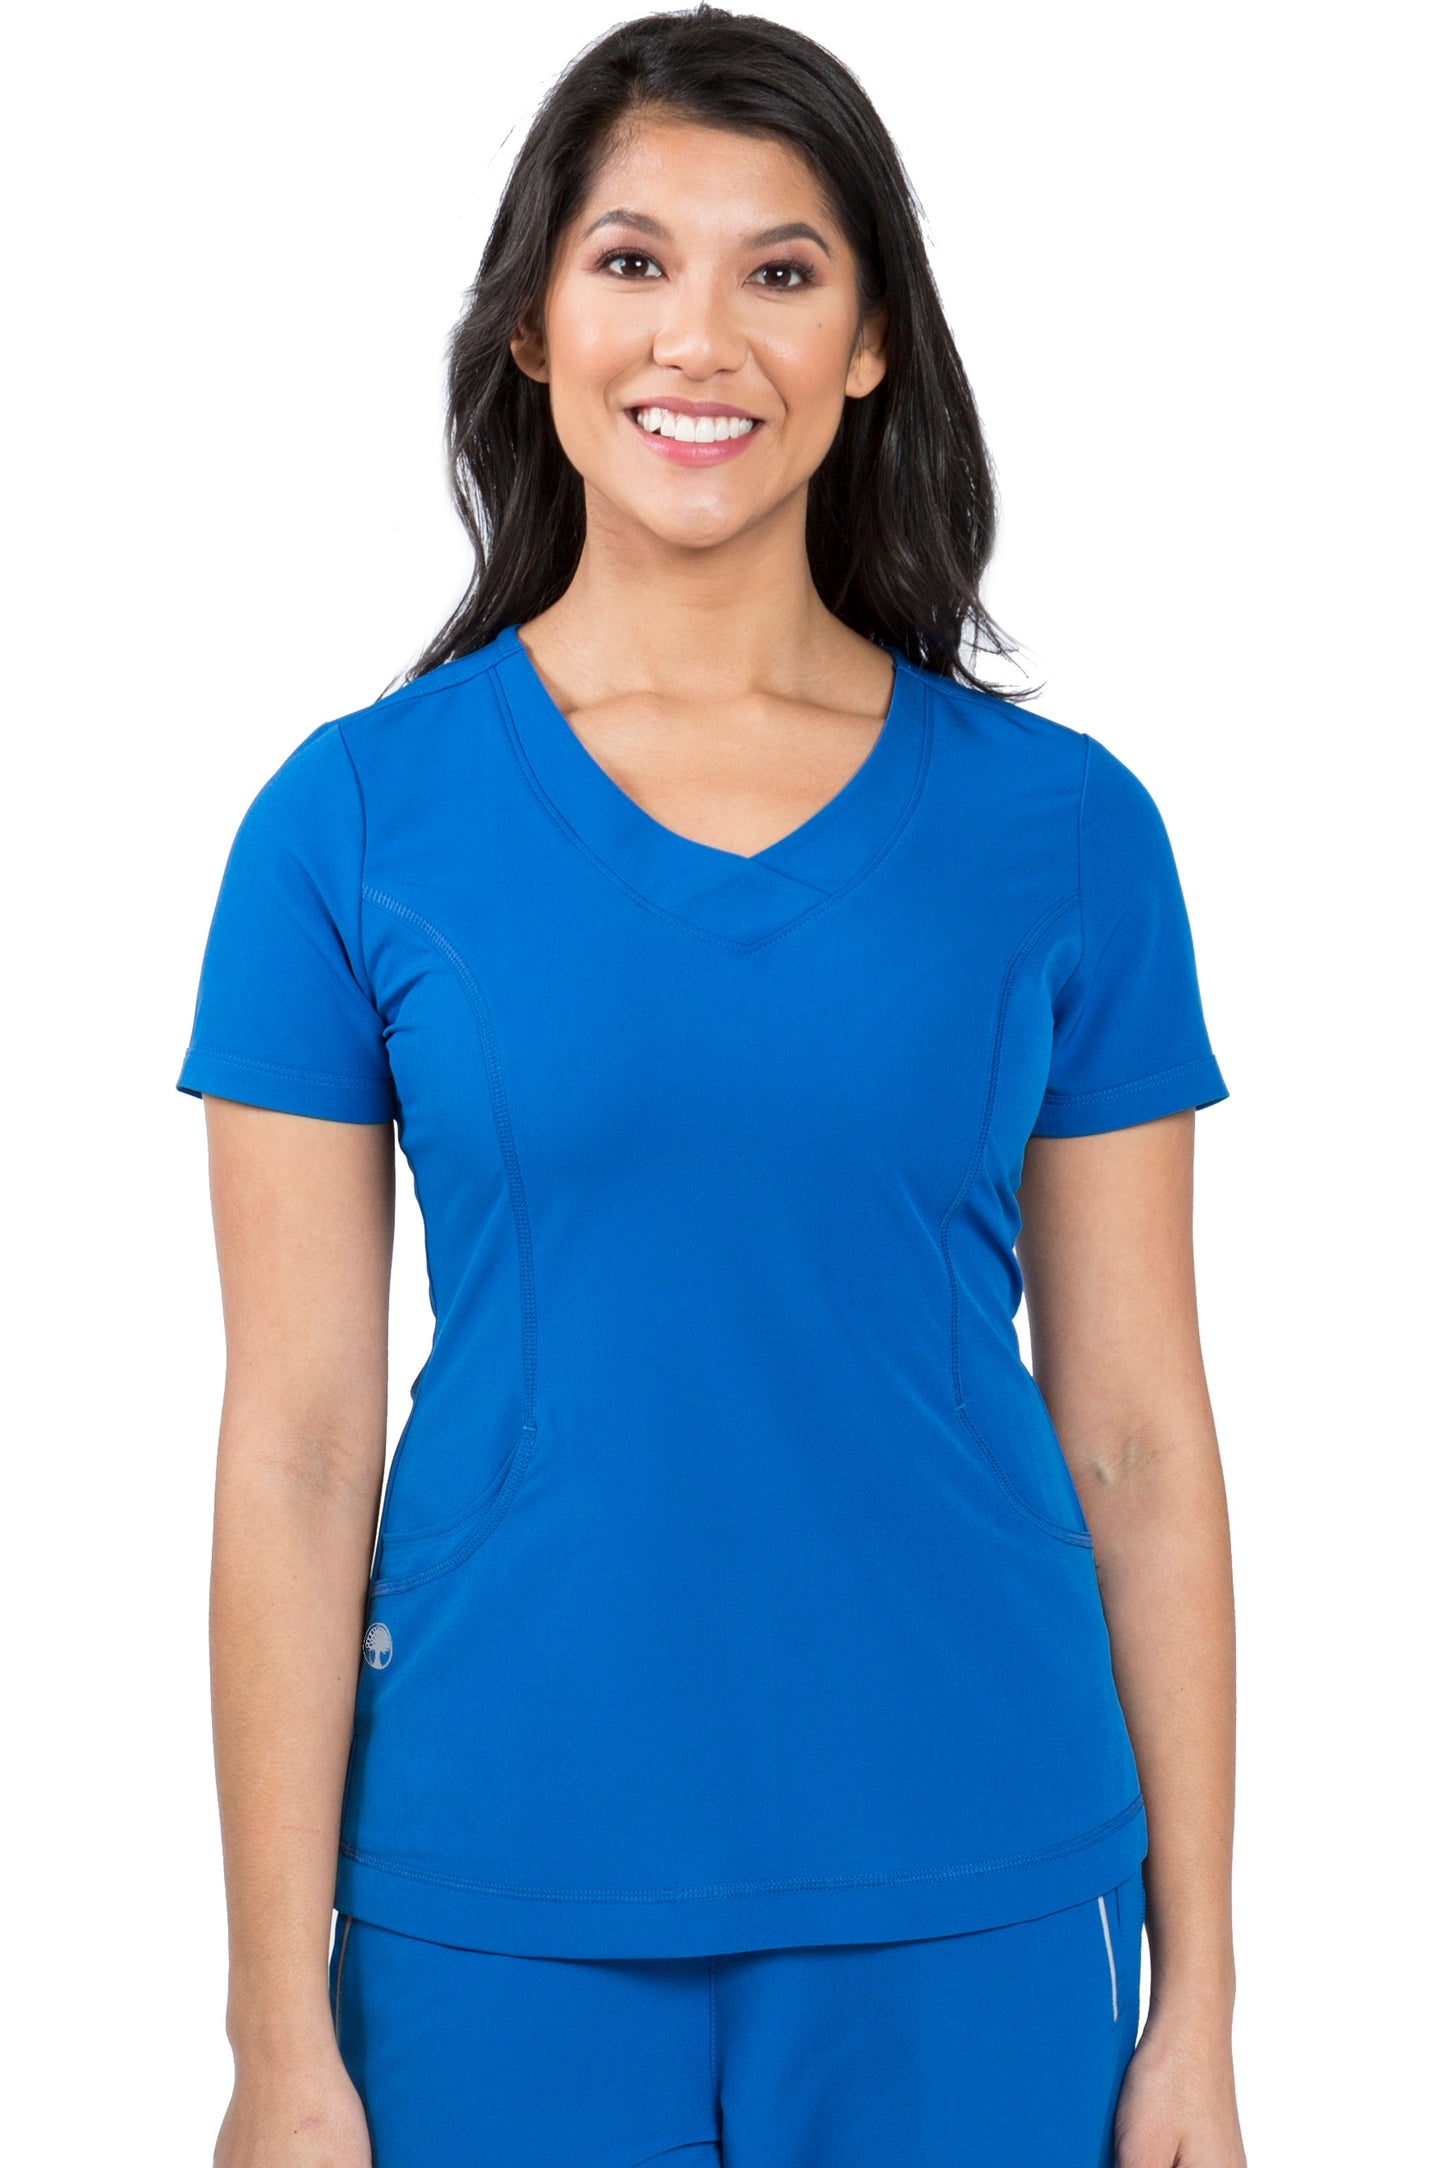 Healing Hands HH360 Sloan Scrub Top in Royal at Parker's Clothing and Shoes.